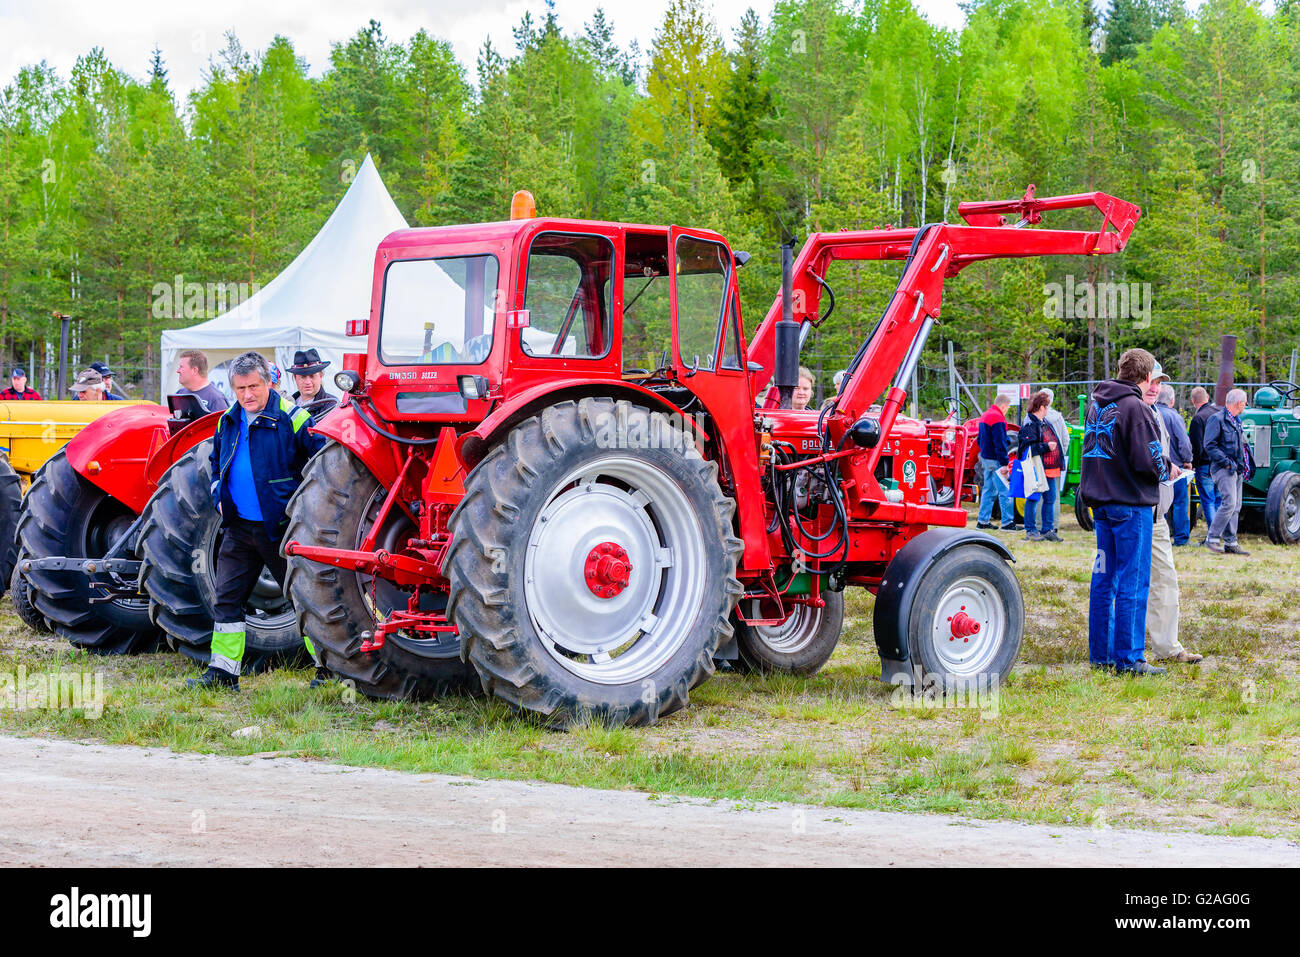 Emmaboda, Sweden - May 14, 2016: Forest and tractor (Skog och traktor) fair. People looking at vintage classic tractors. Here a Stock Photo